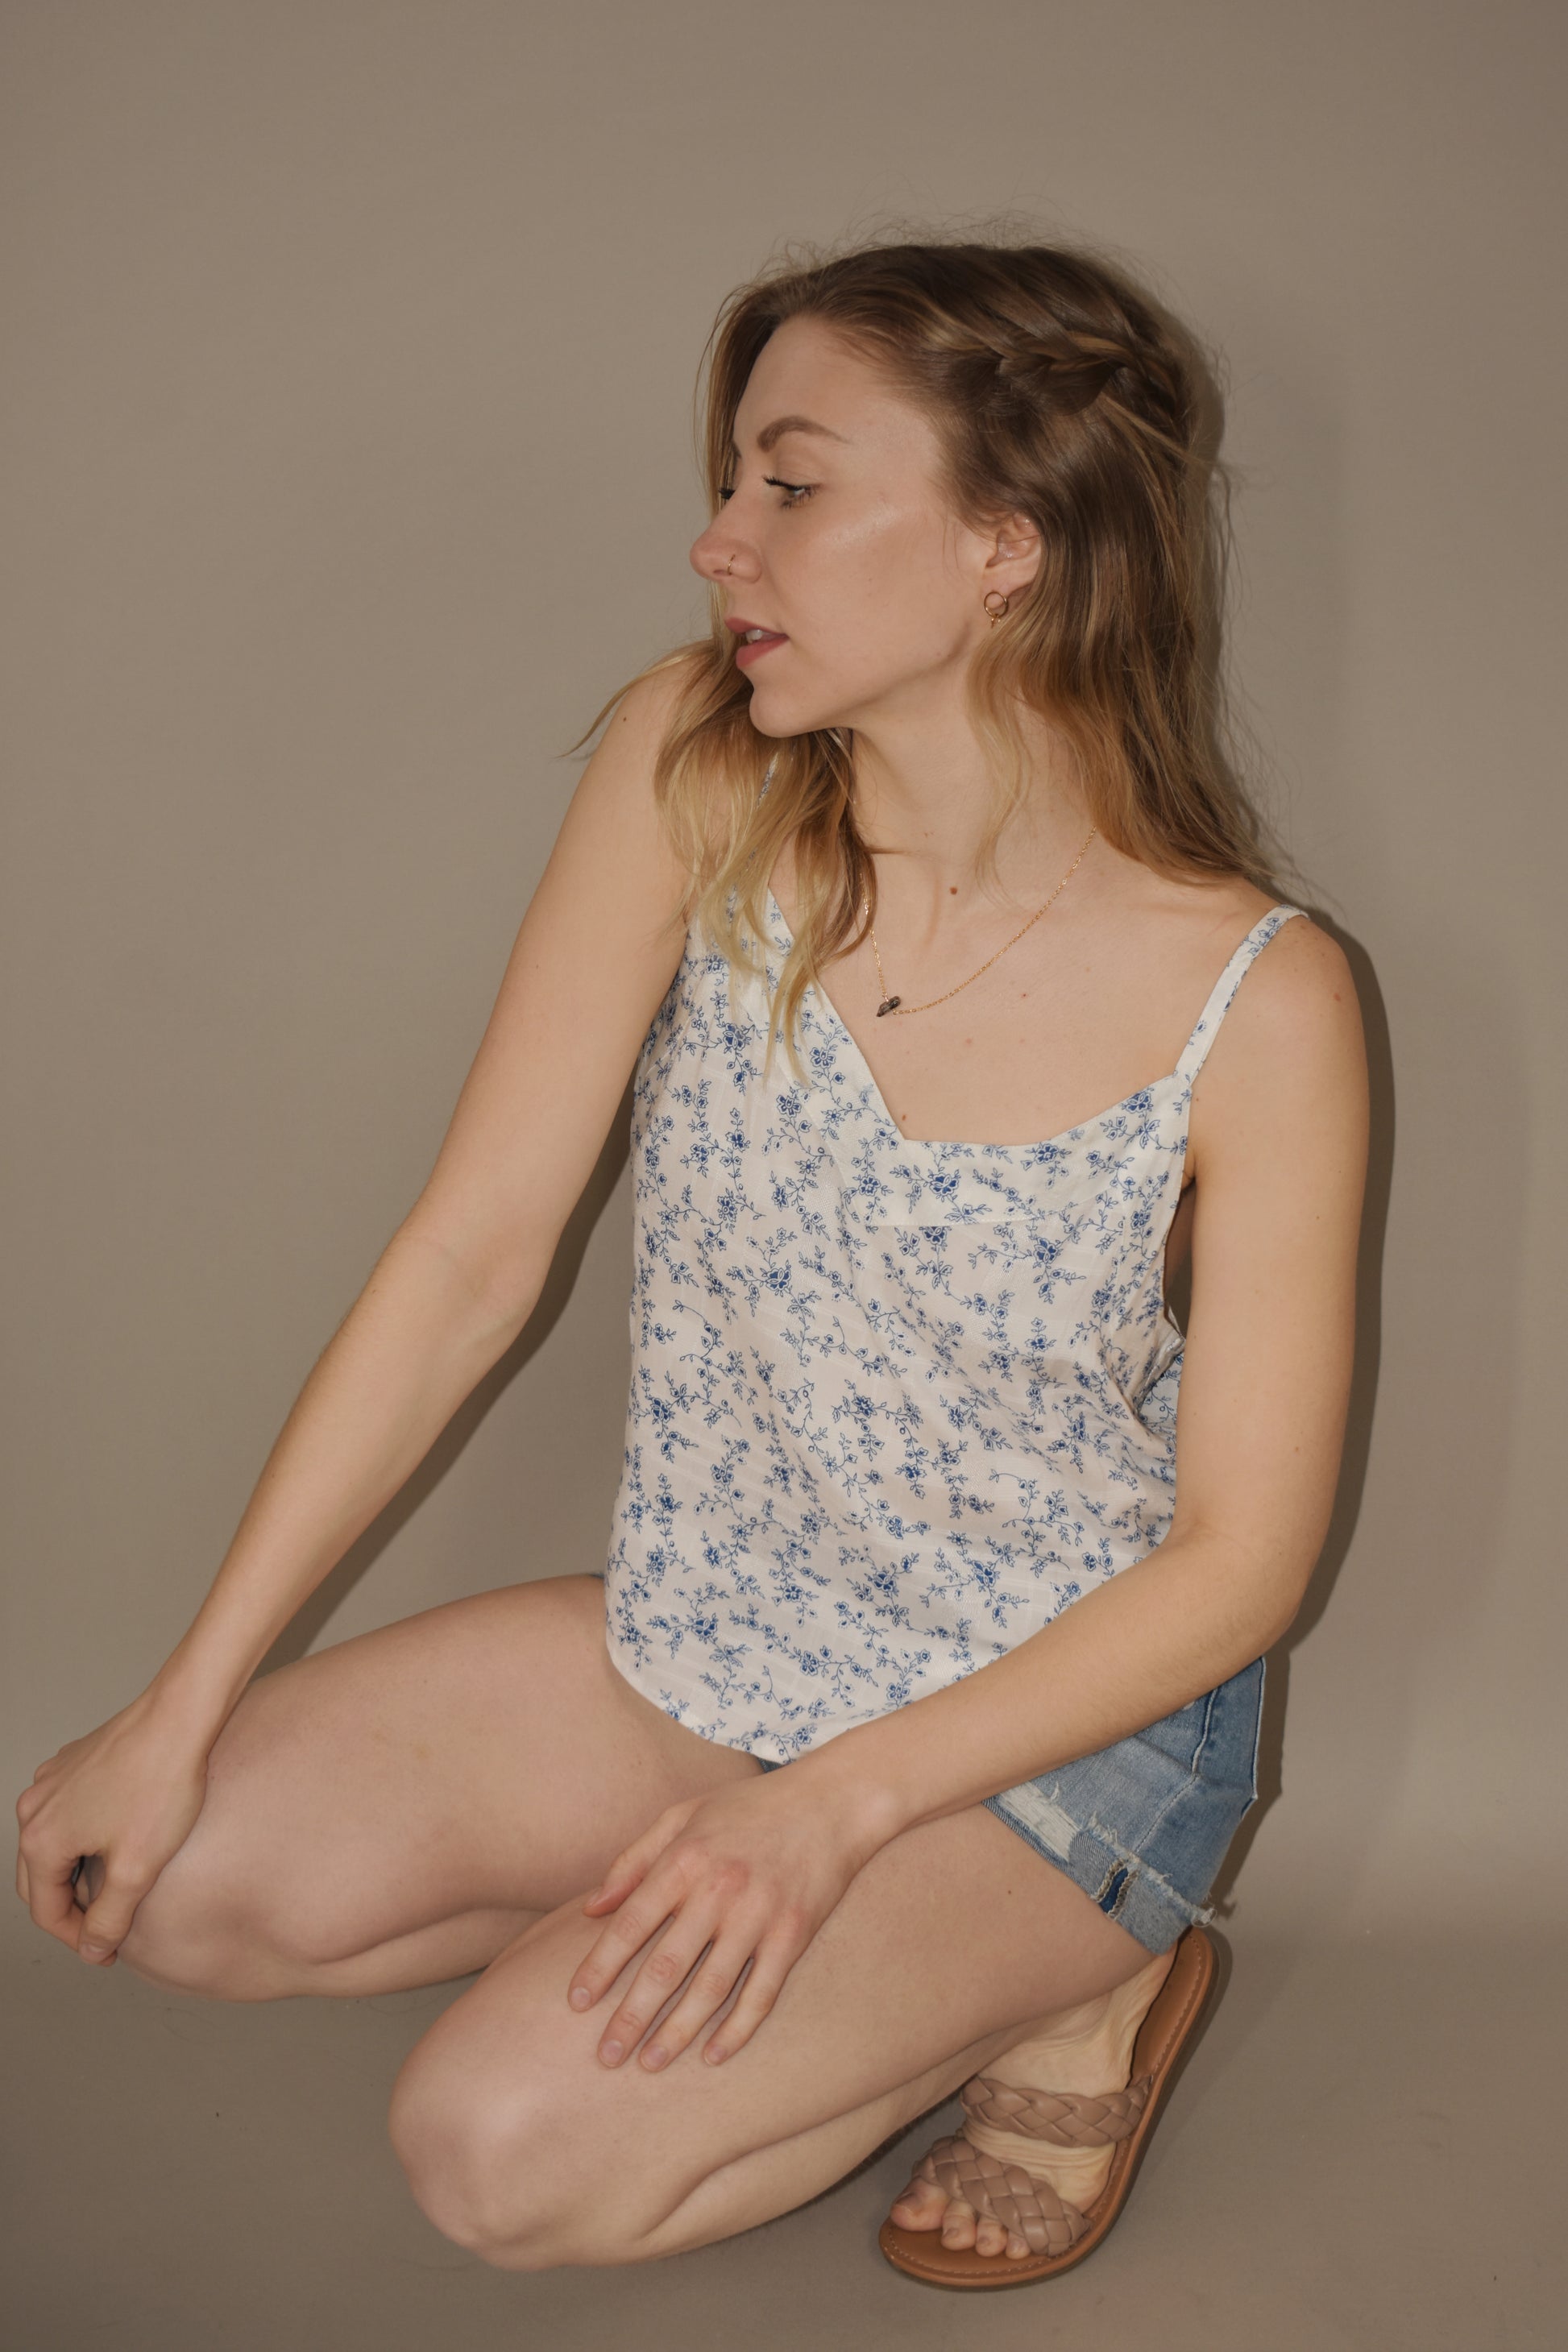 full length loose fitting white cami with dainty blue floral print. adjustable spaghetti straps and v neck.